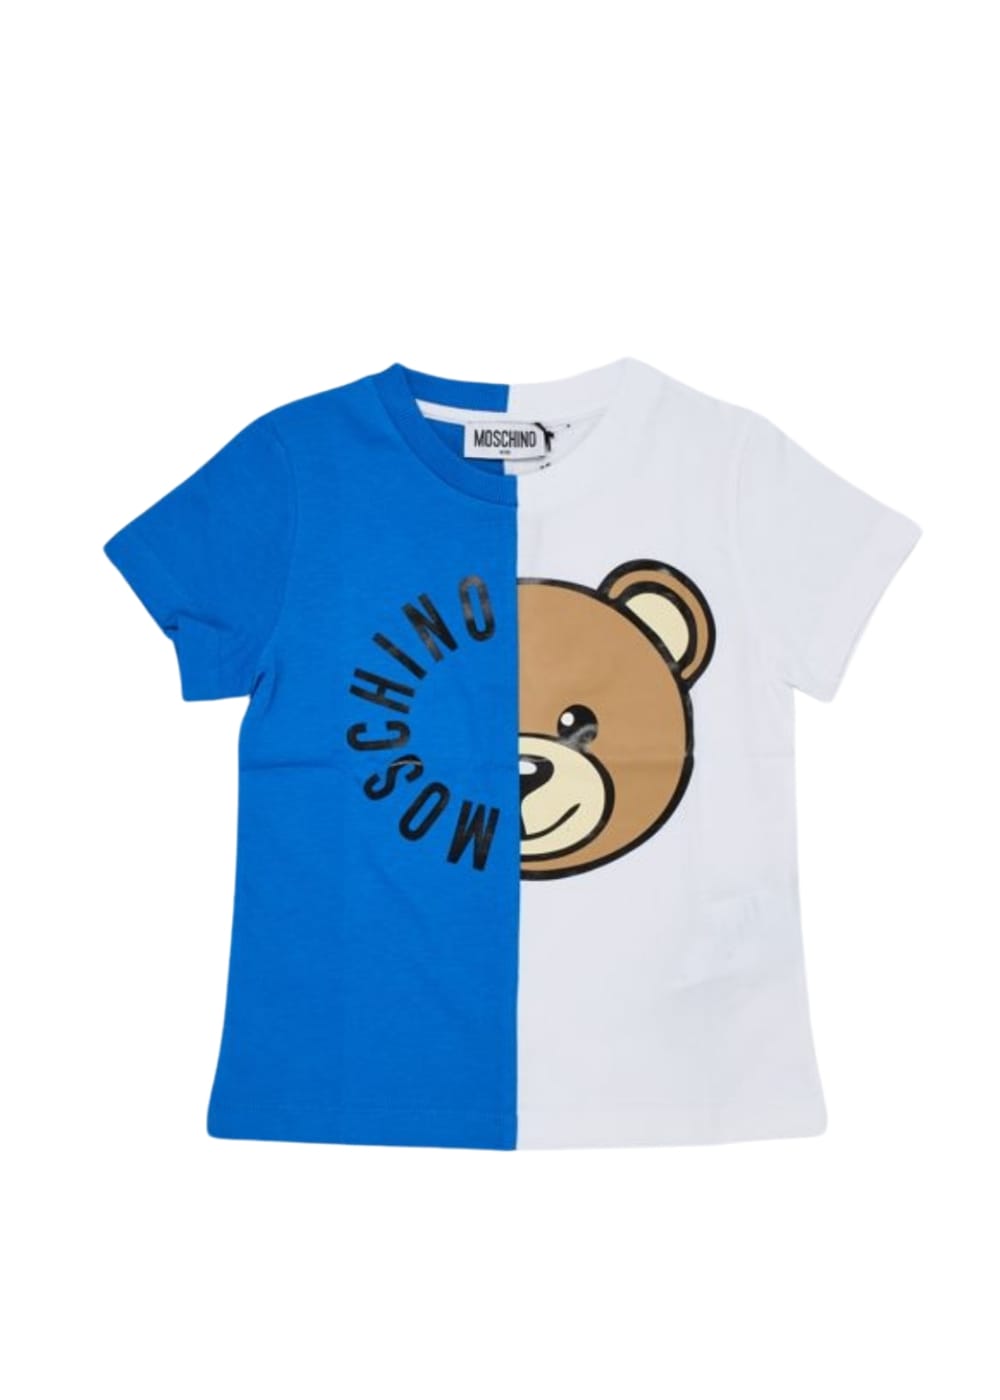 Featured image for “Moschino T-shirt con Stampa”